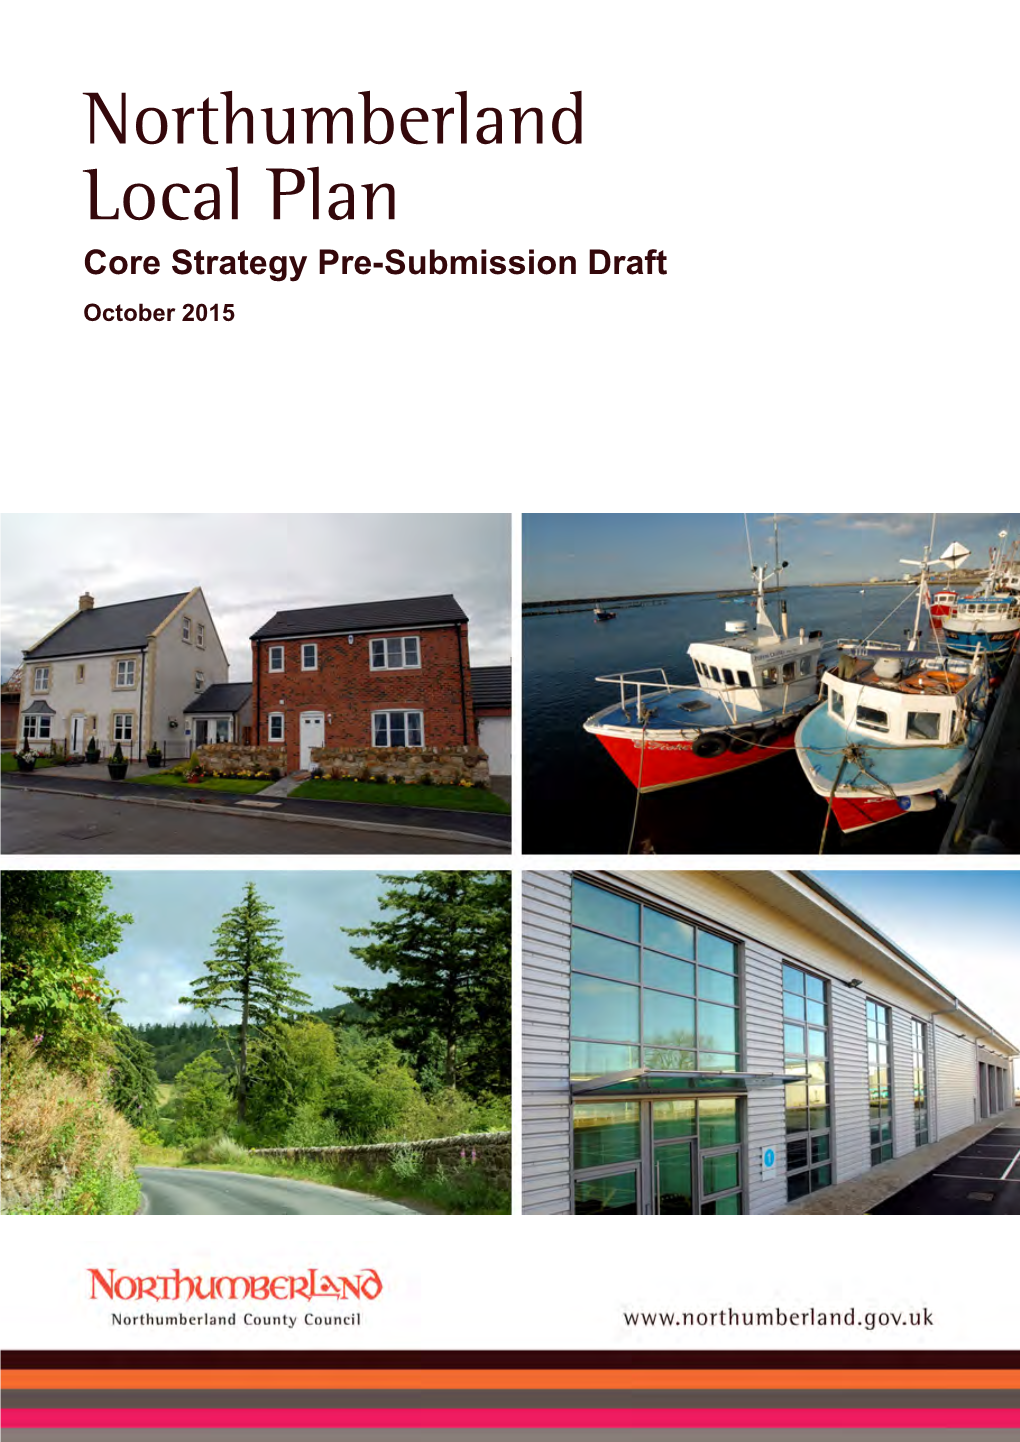 Northumberland Local Plan Core Strategy Pre-Submission Draft October 2015 Contents